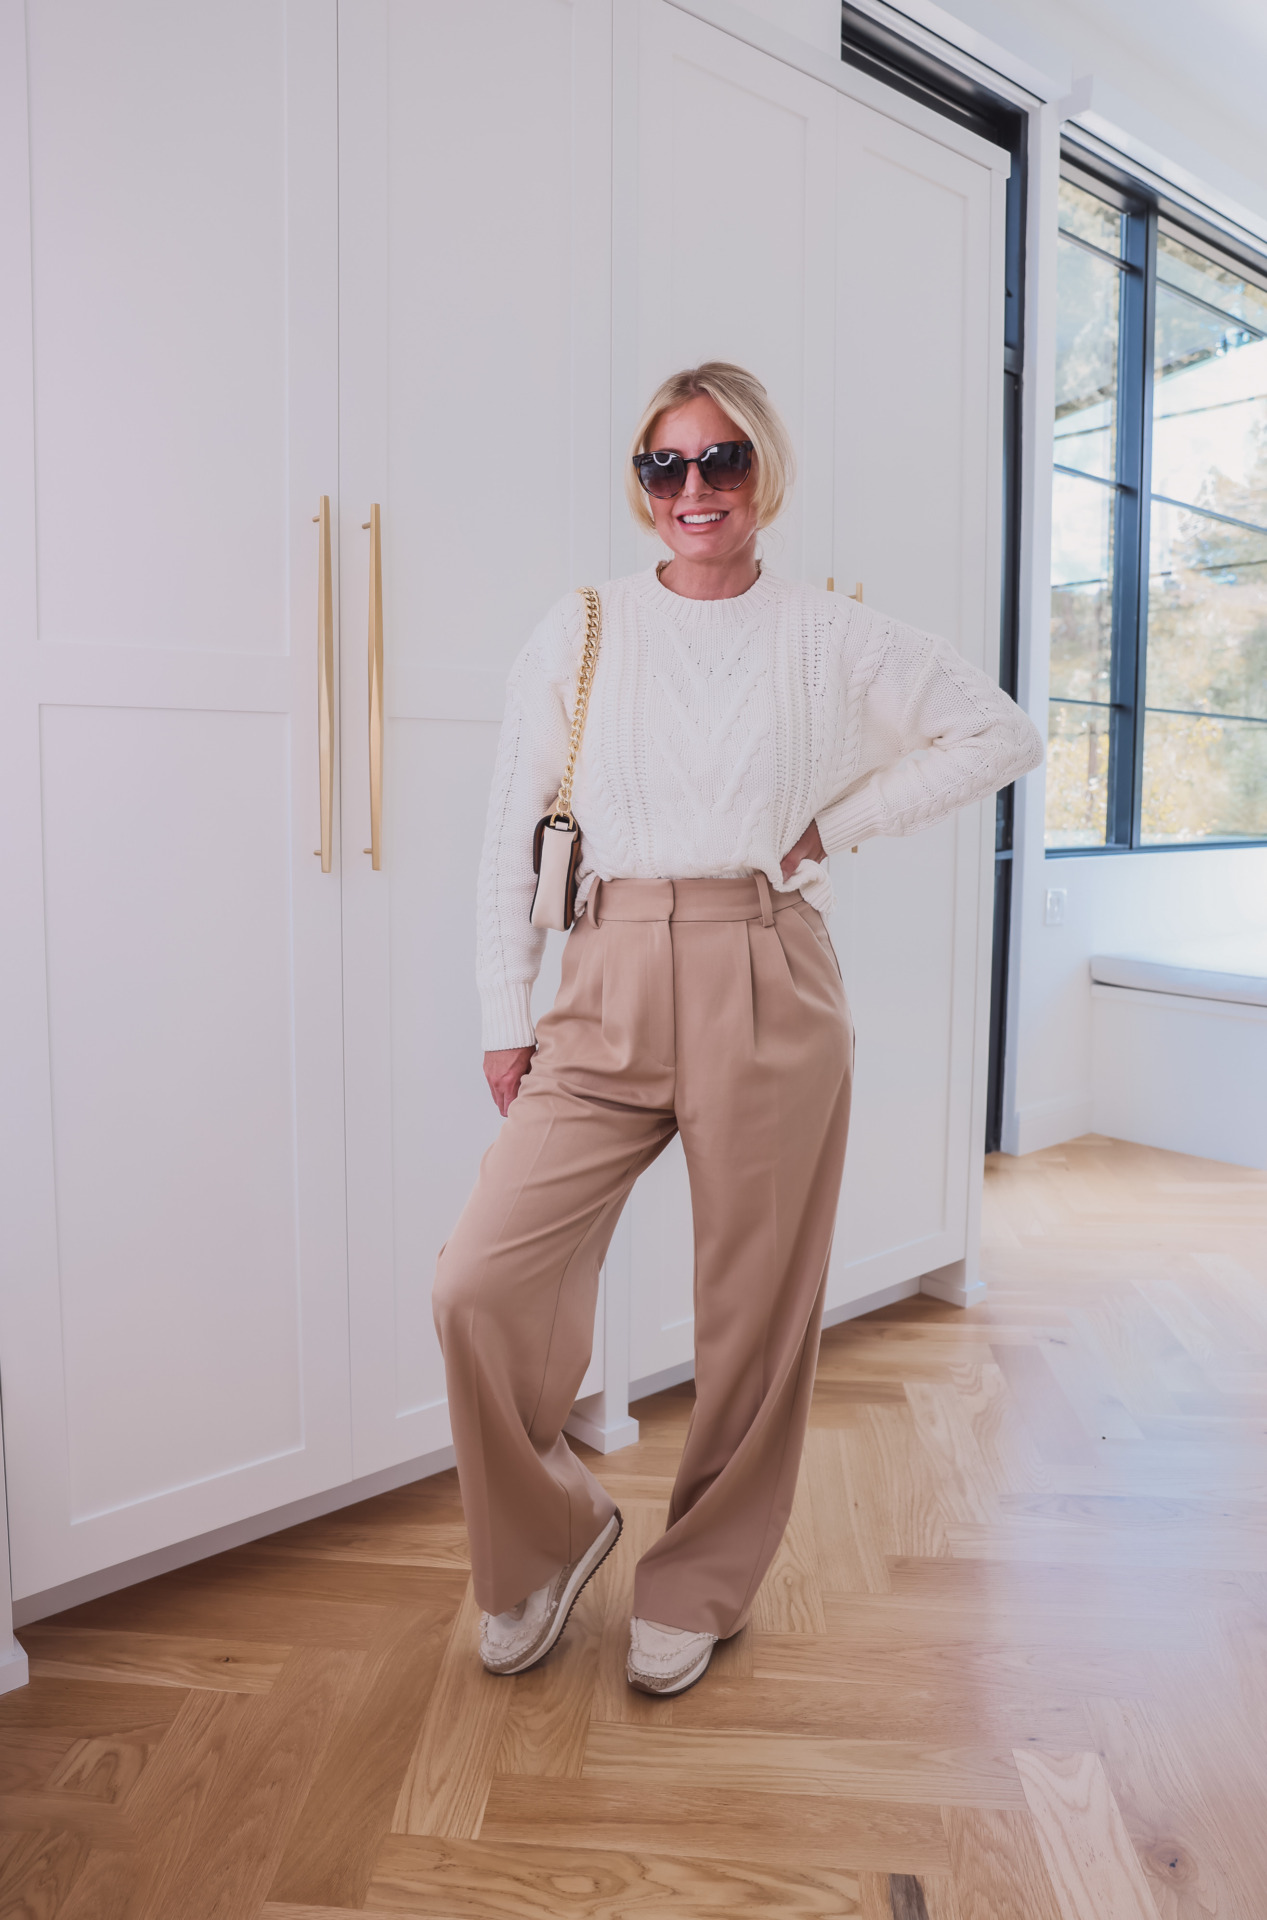 how to wear pleated pants, ways to wear pleated pants, ways to style pleated pants, how to style pleated pants, pleated trousers women, pleated pants over 40, favorite daughter pleated pants, pleated pants 2023, pleated pants outfits, erin busbee, busbee style, fashion over 40, pistola white cable knit sweater, rag & bone espadrille sneakers, le spec sunglasses, marc jacobs tri-color handbag